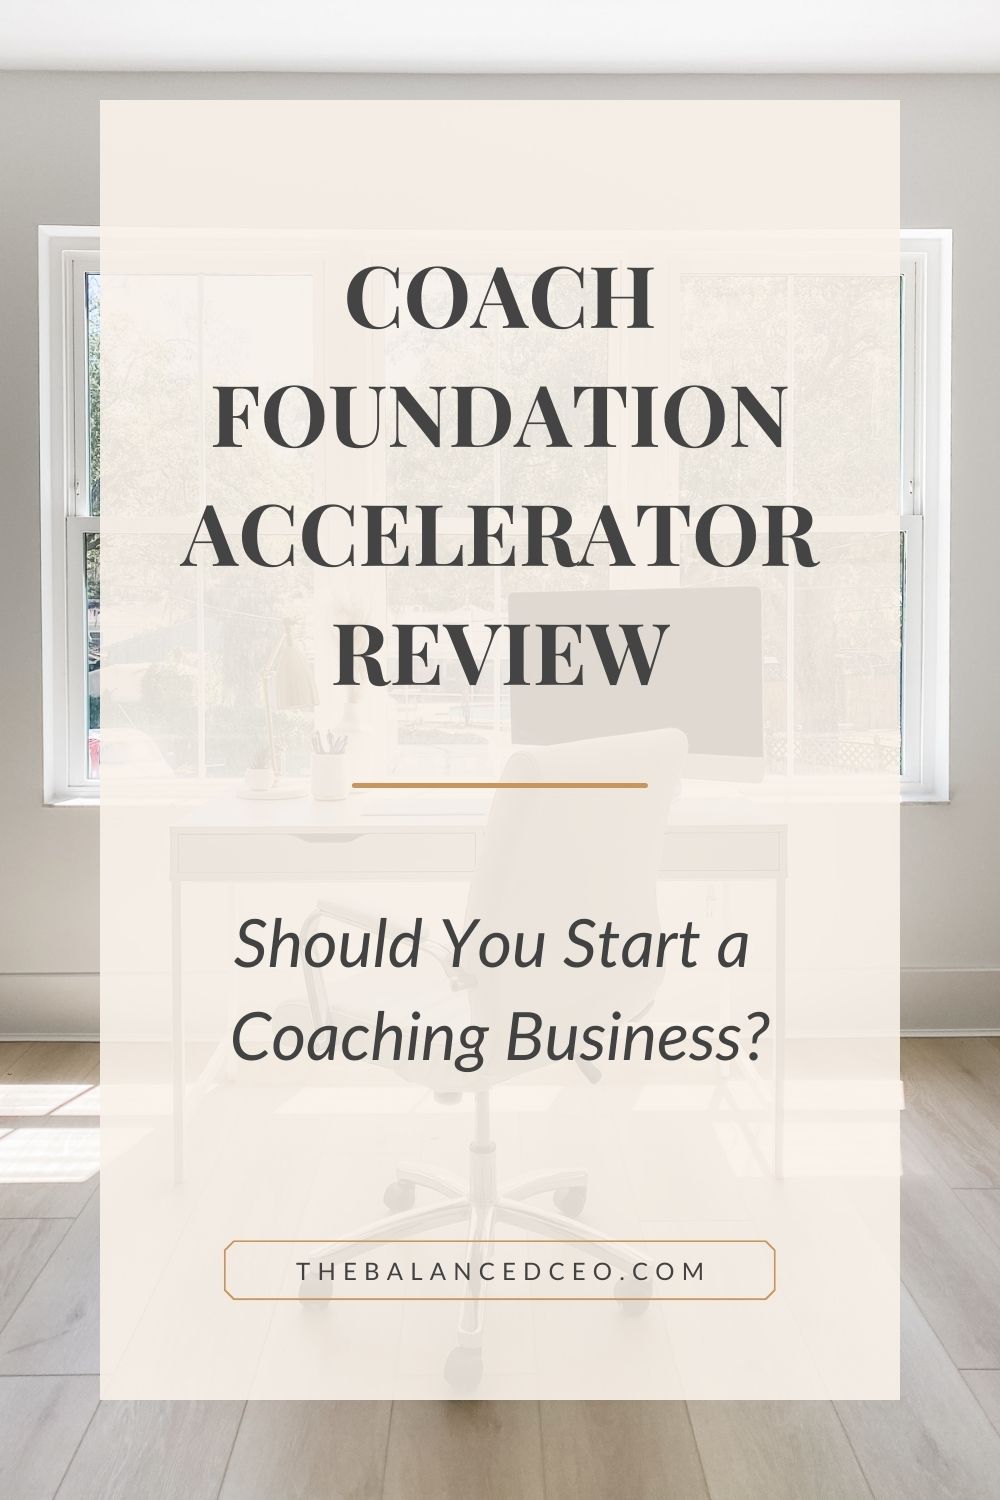 Coach Foundation Accelerator Review: Should You Start a Coaching Business?  - The Balanced CEO